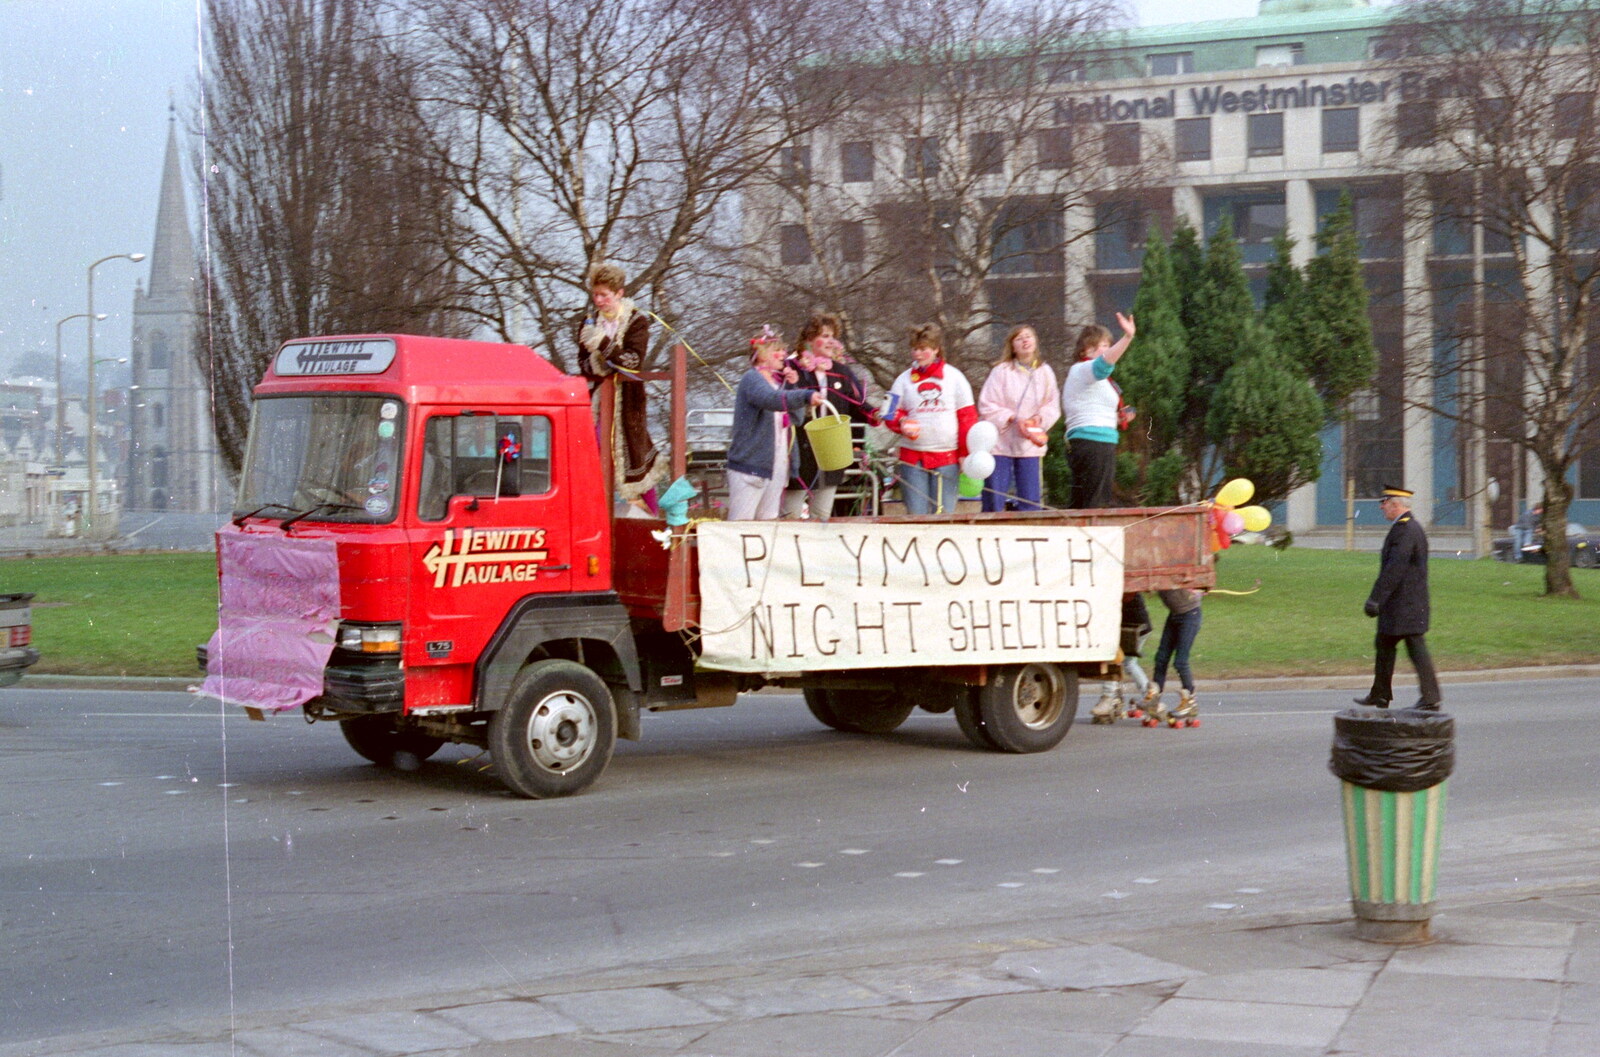 Plymouth Night Shelter on St. Andrew's Cross from Uni: PPSU "Jazz" RAG Street Parade, Plymouth, Devon - 17th February 1986